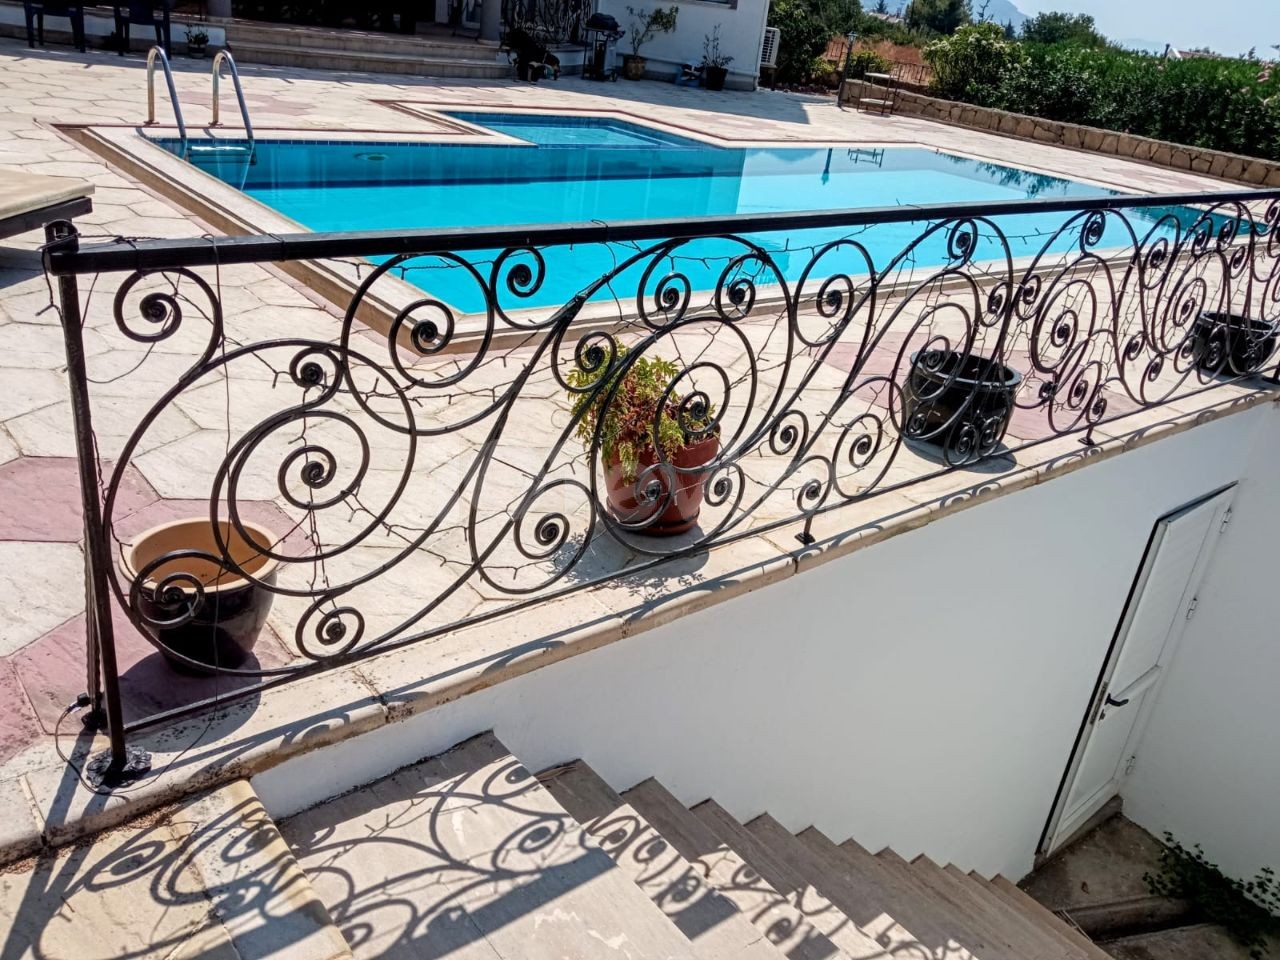 Alsancak Kyrenia, mountain side, 4 + 1 all bedrooms are in an esteemed villa with a pool of ten suites within 750 m2. ** 